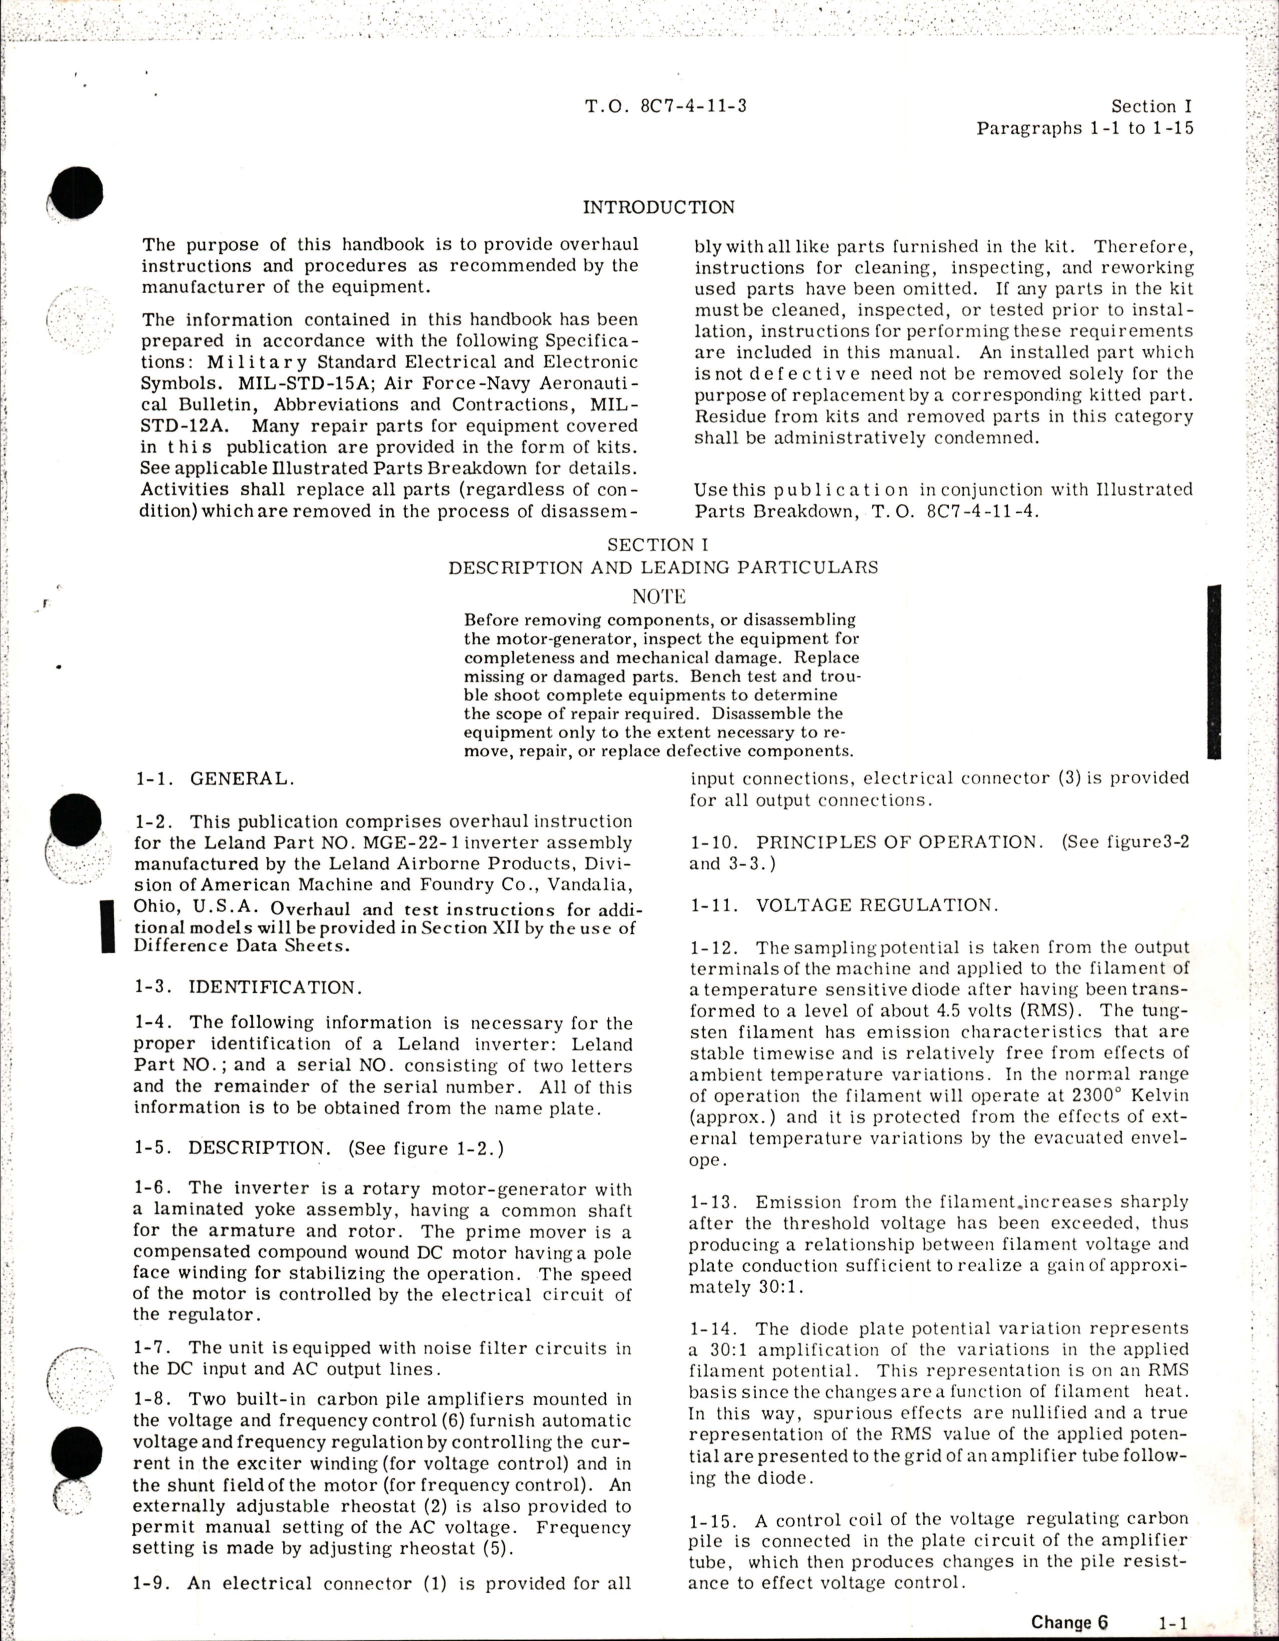 Sample page 5 from AirCorps Library document: Overhaul Instructions for Inverter Assembly - Parts MGE-22-1, MGE-22-100